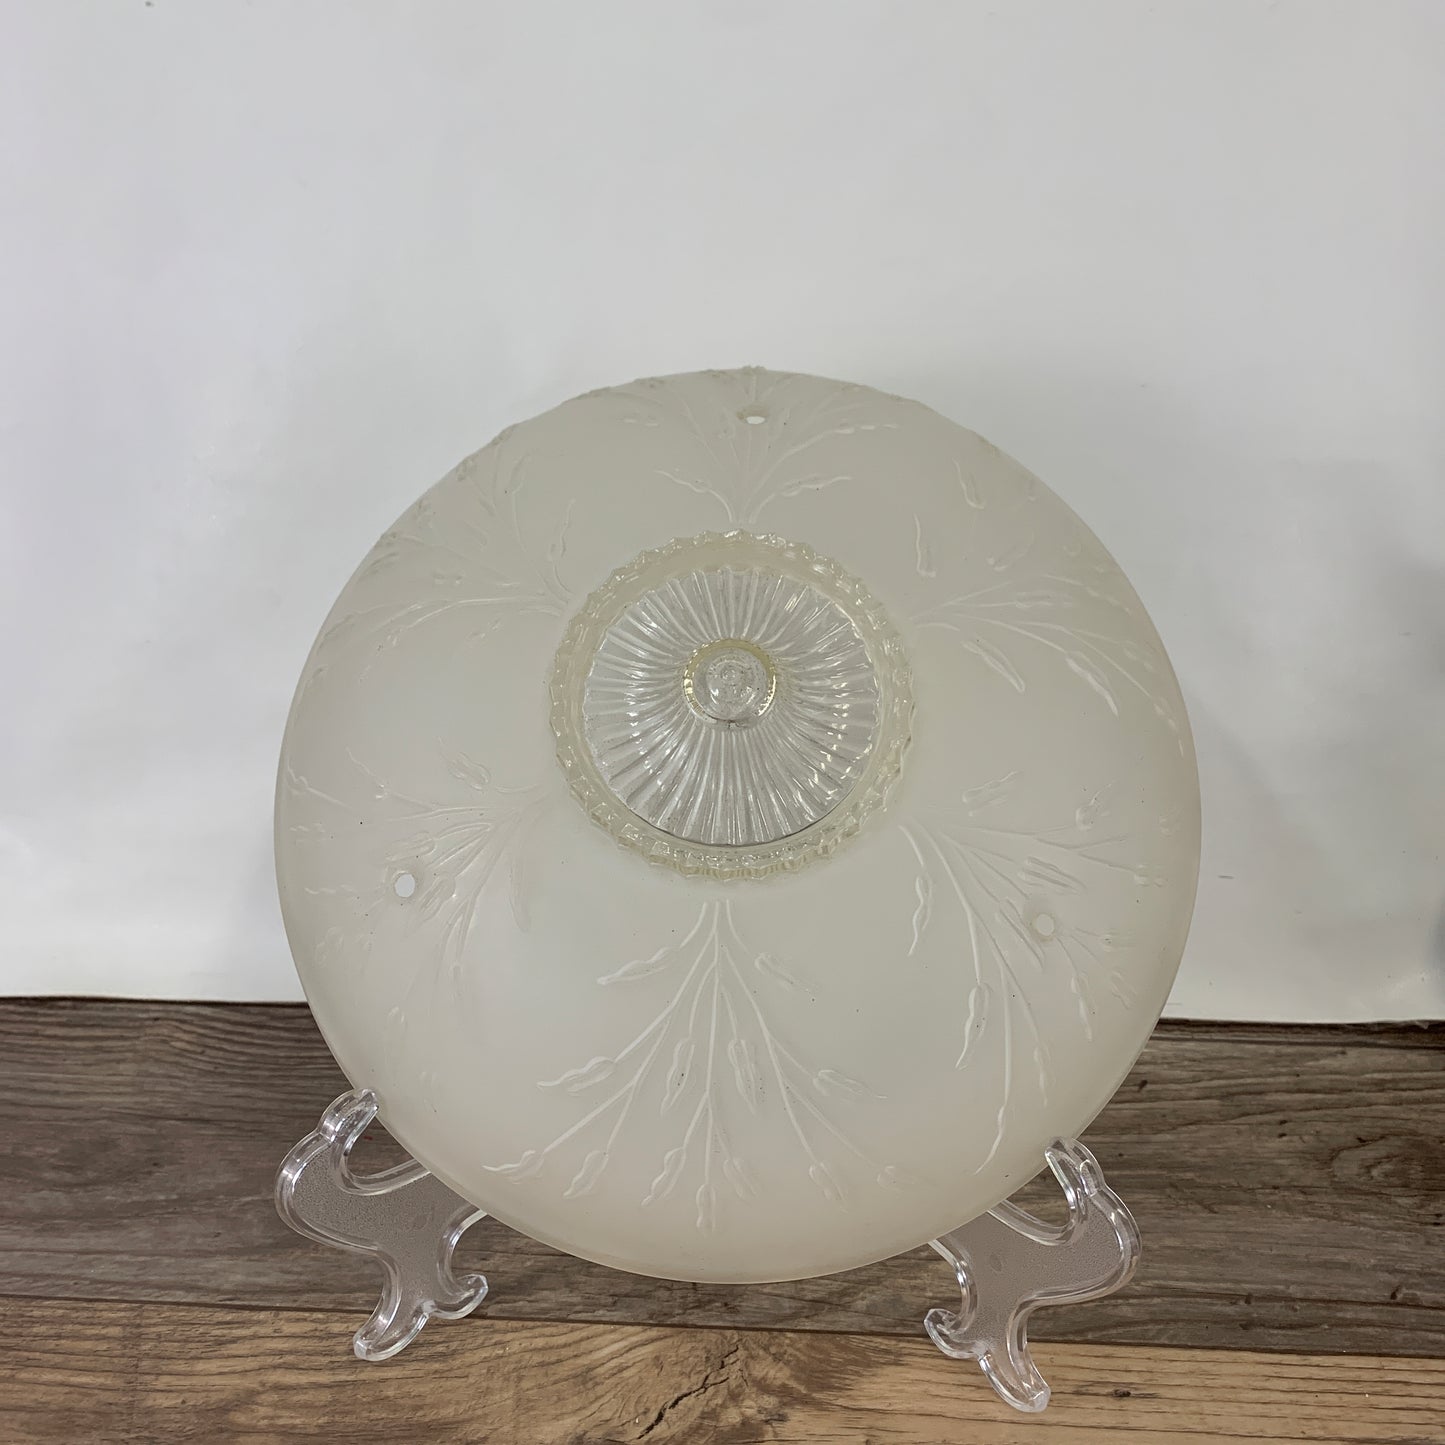 Frosted Glass 3 Hole Light Cover, Antique Lamp Shade with Raised Leaf Design